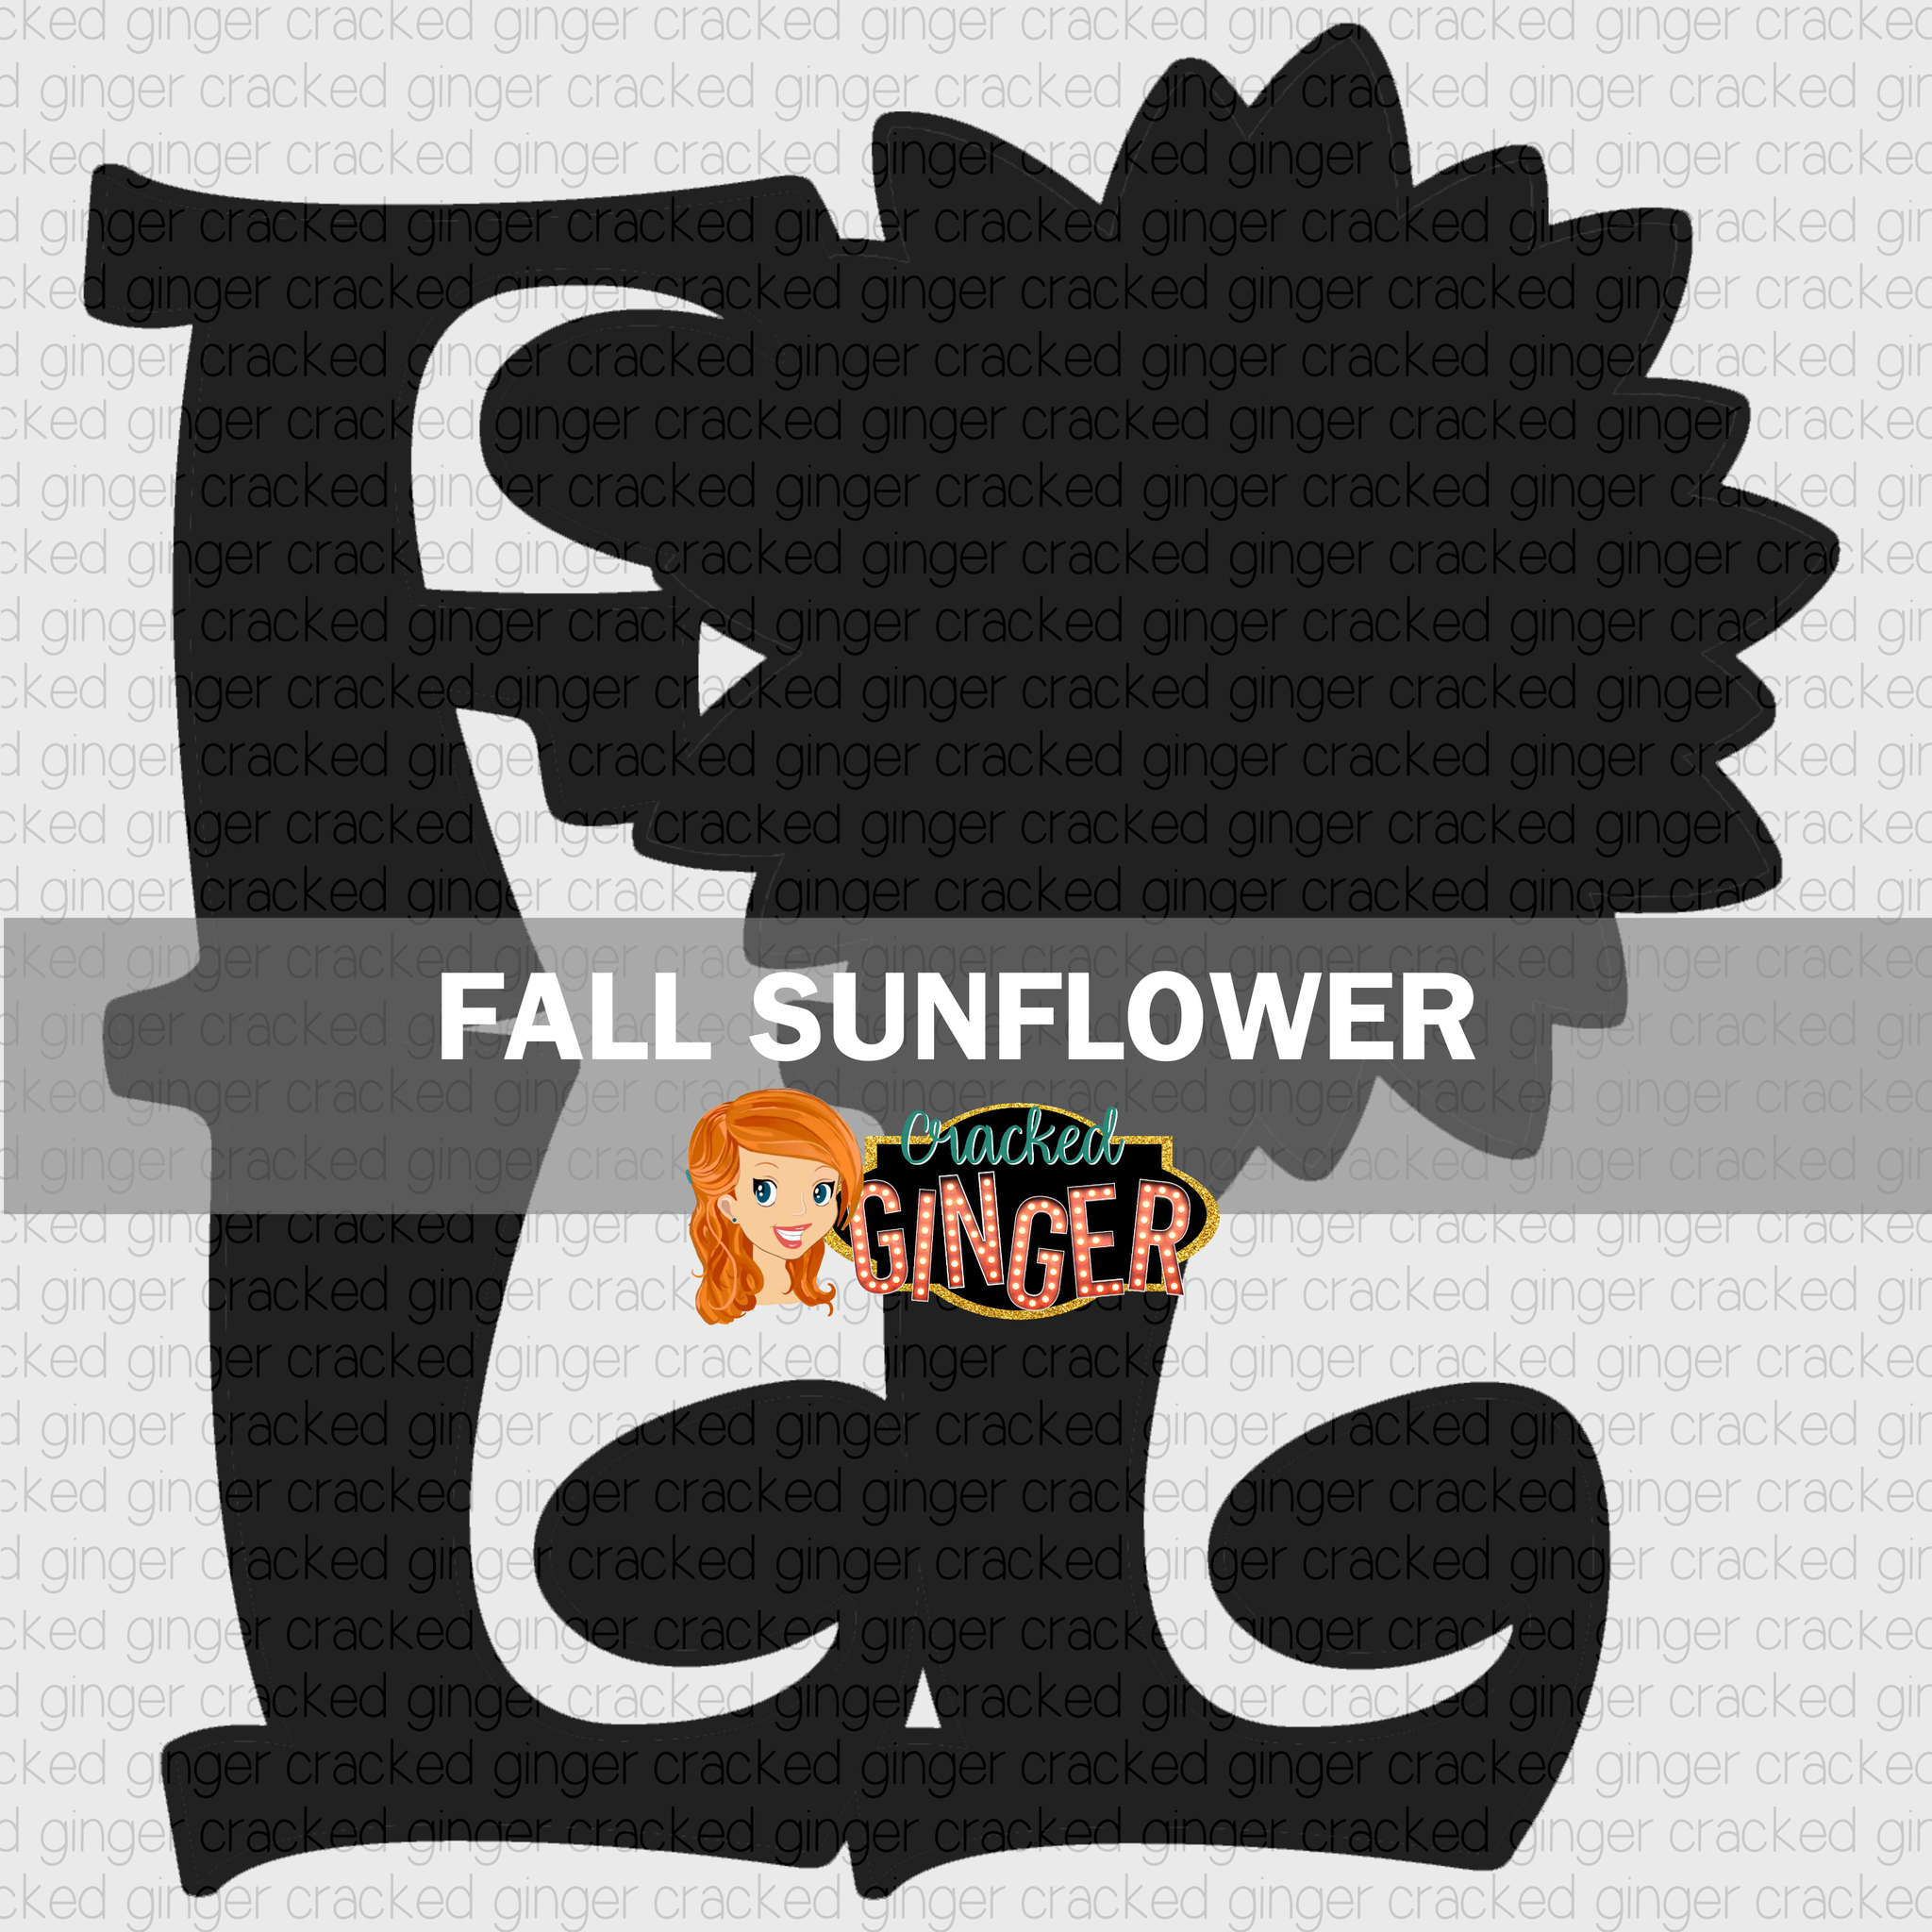 Fall with Sunflower